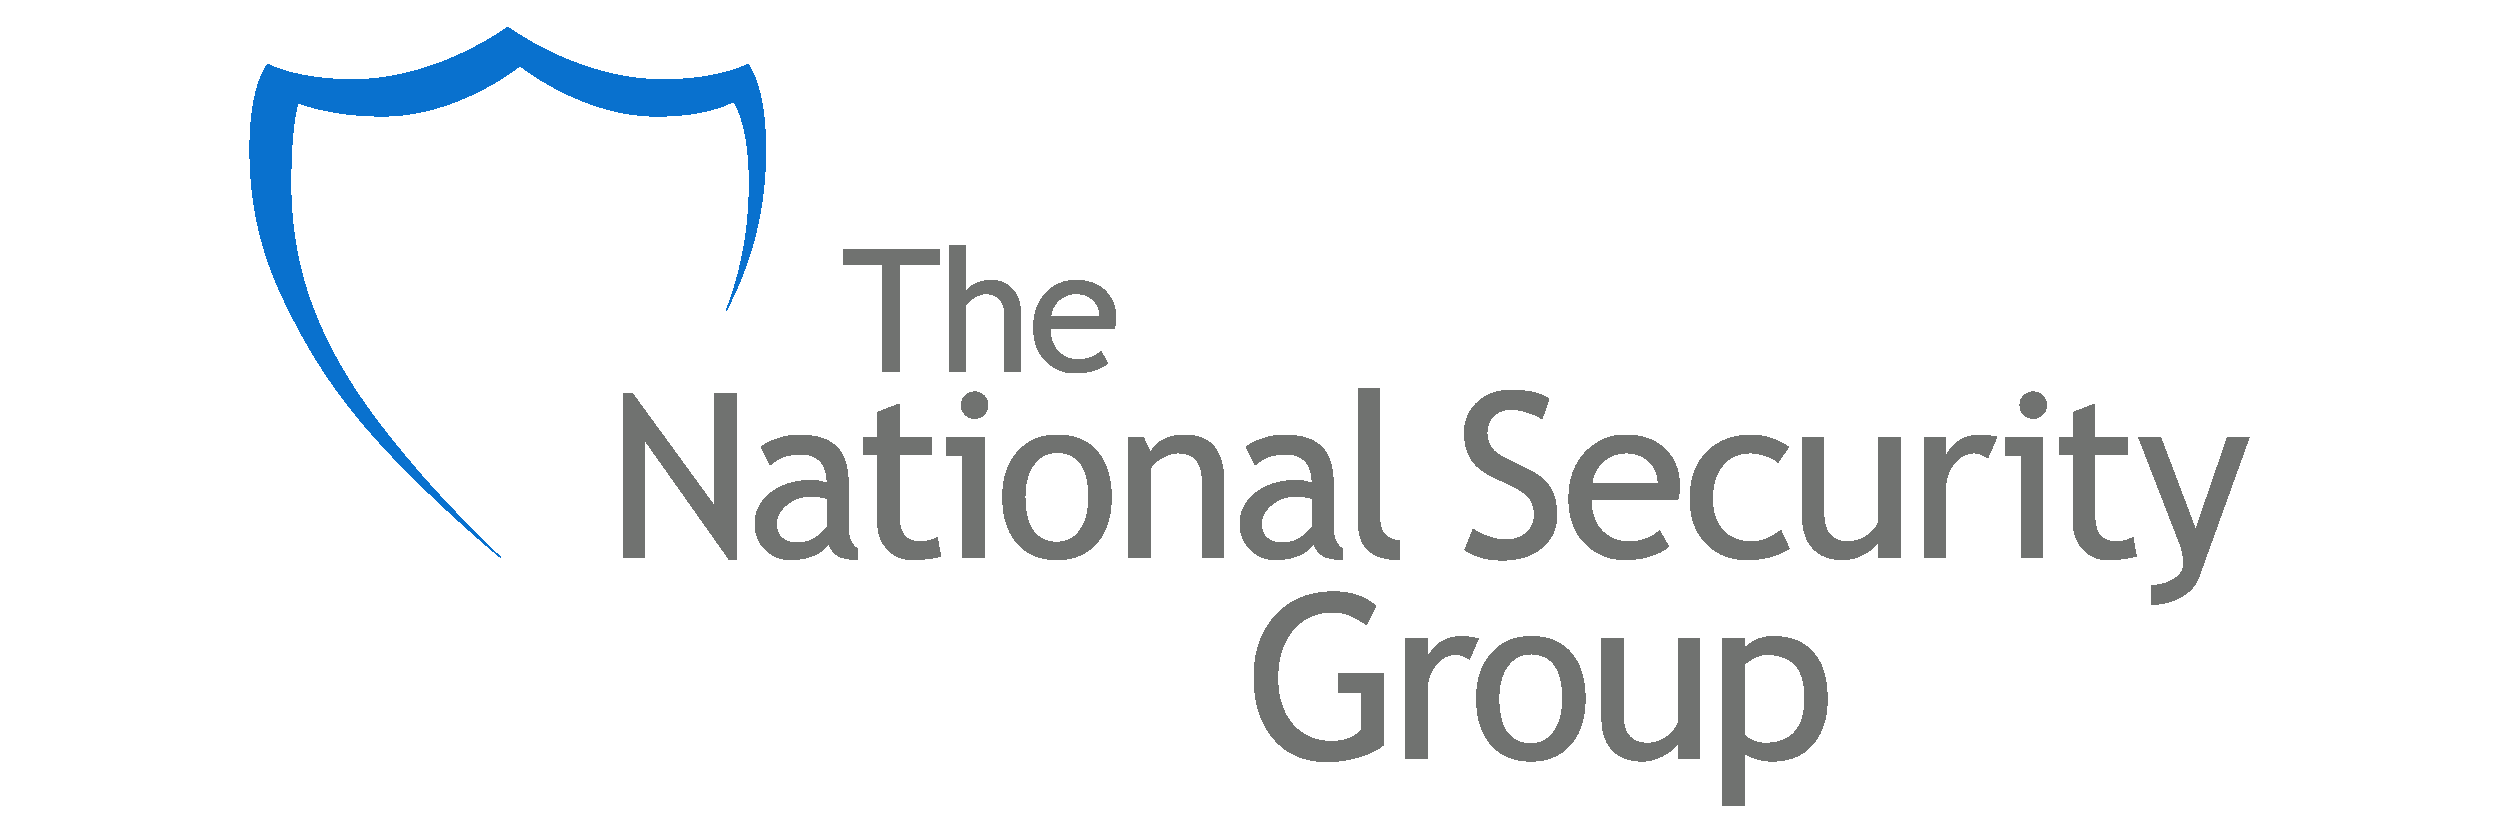 The-National-Security-Group